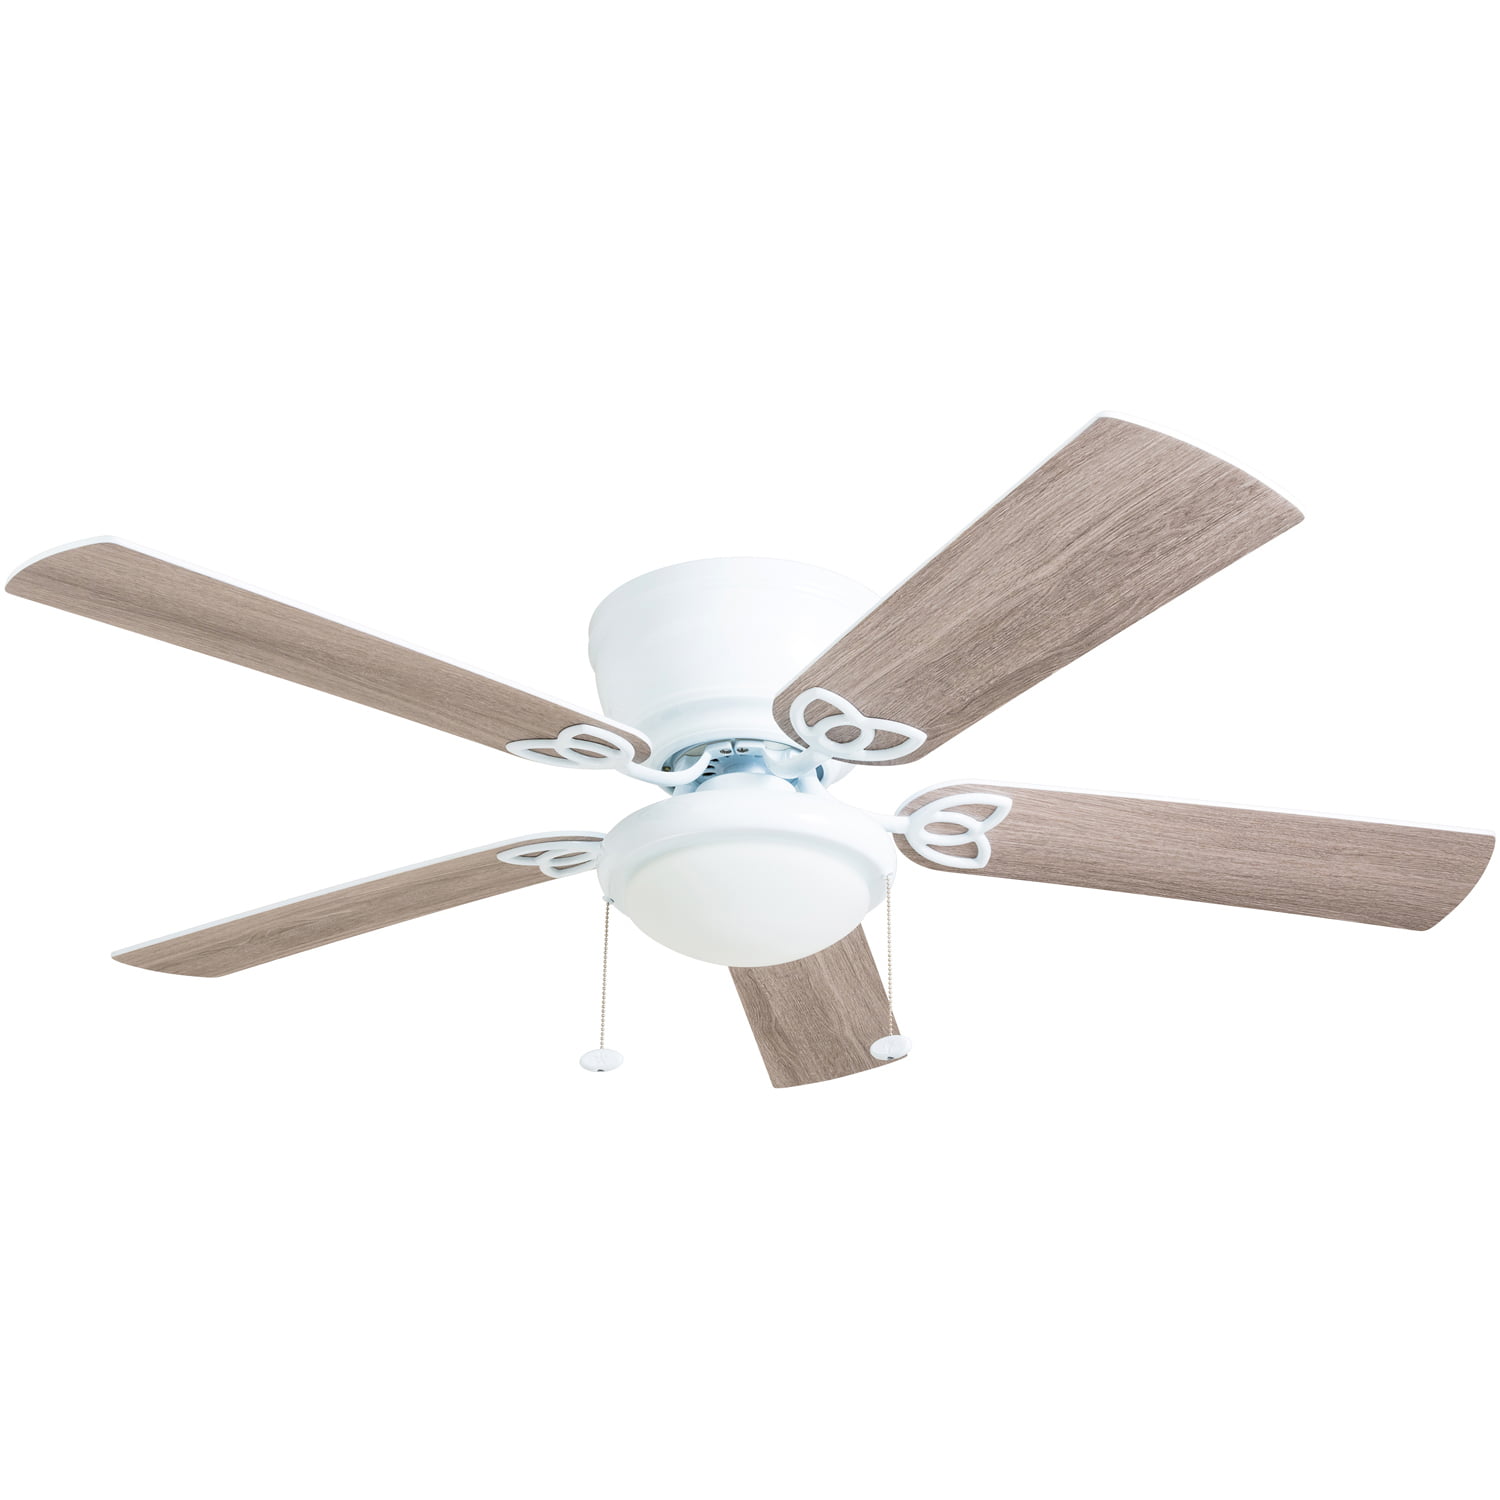 5 Blade Indoor Ceiling Fan With Light, 52 White Ceiling Fan